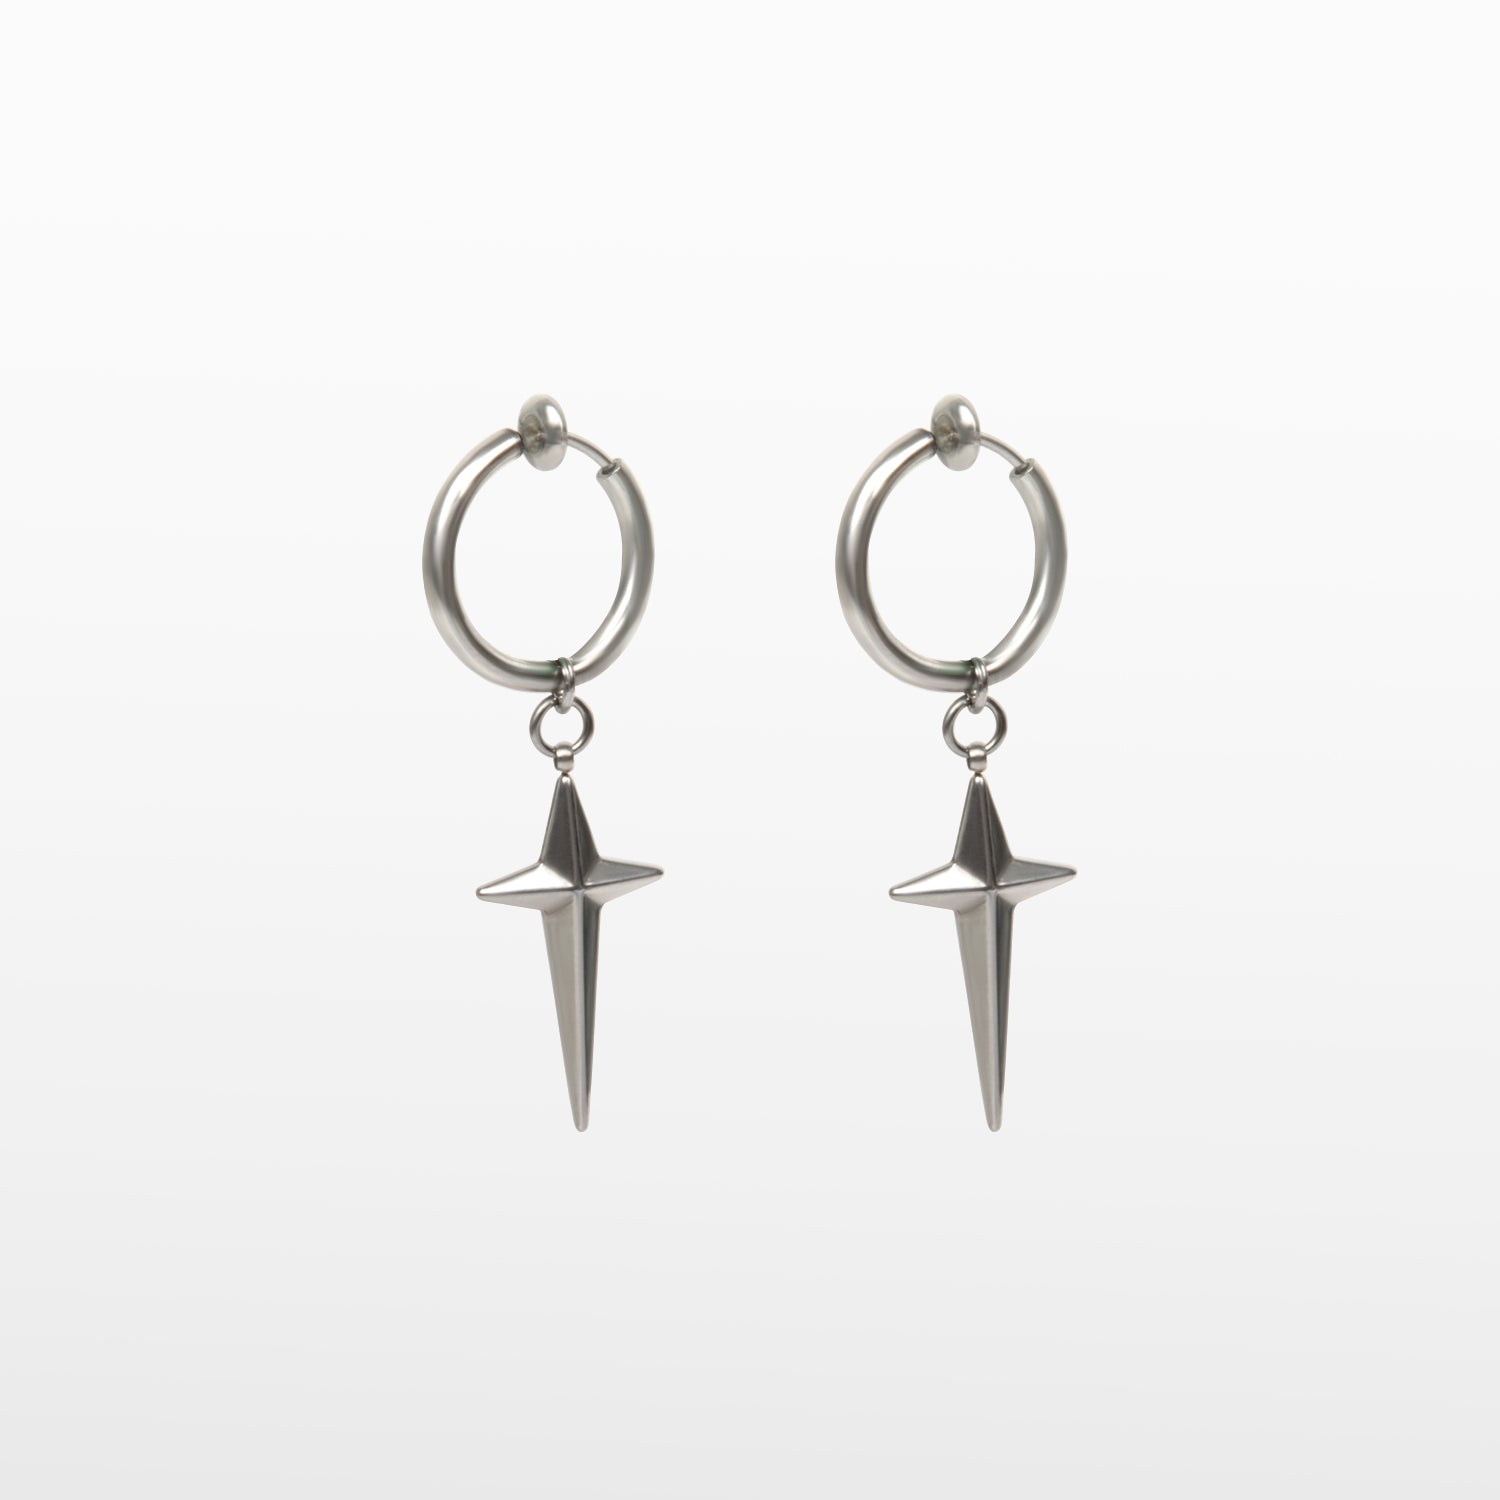 Image of the Altair Clip On Earrings offer a secure and adjustable closure that are perfect for those with thin ear lobes. Crafted with stainless steel and featuring non-tarnish and water-resistant properties, these earrings are hypoallergenic, lead and nickel free. The average comfortable wear duration is 2 to 4 hours. The item is sold as one pair.